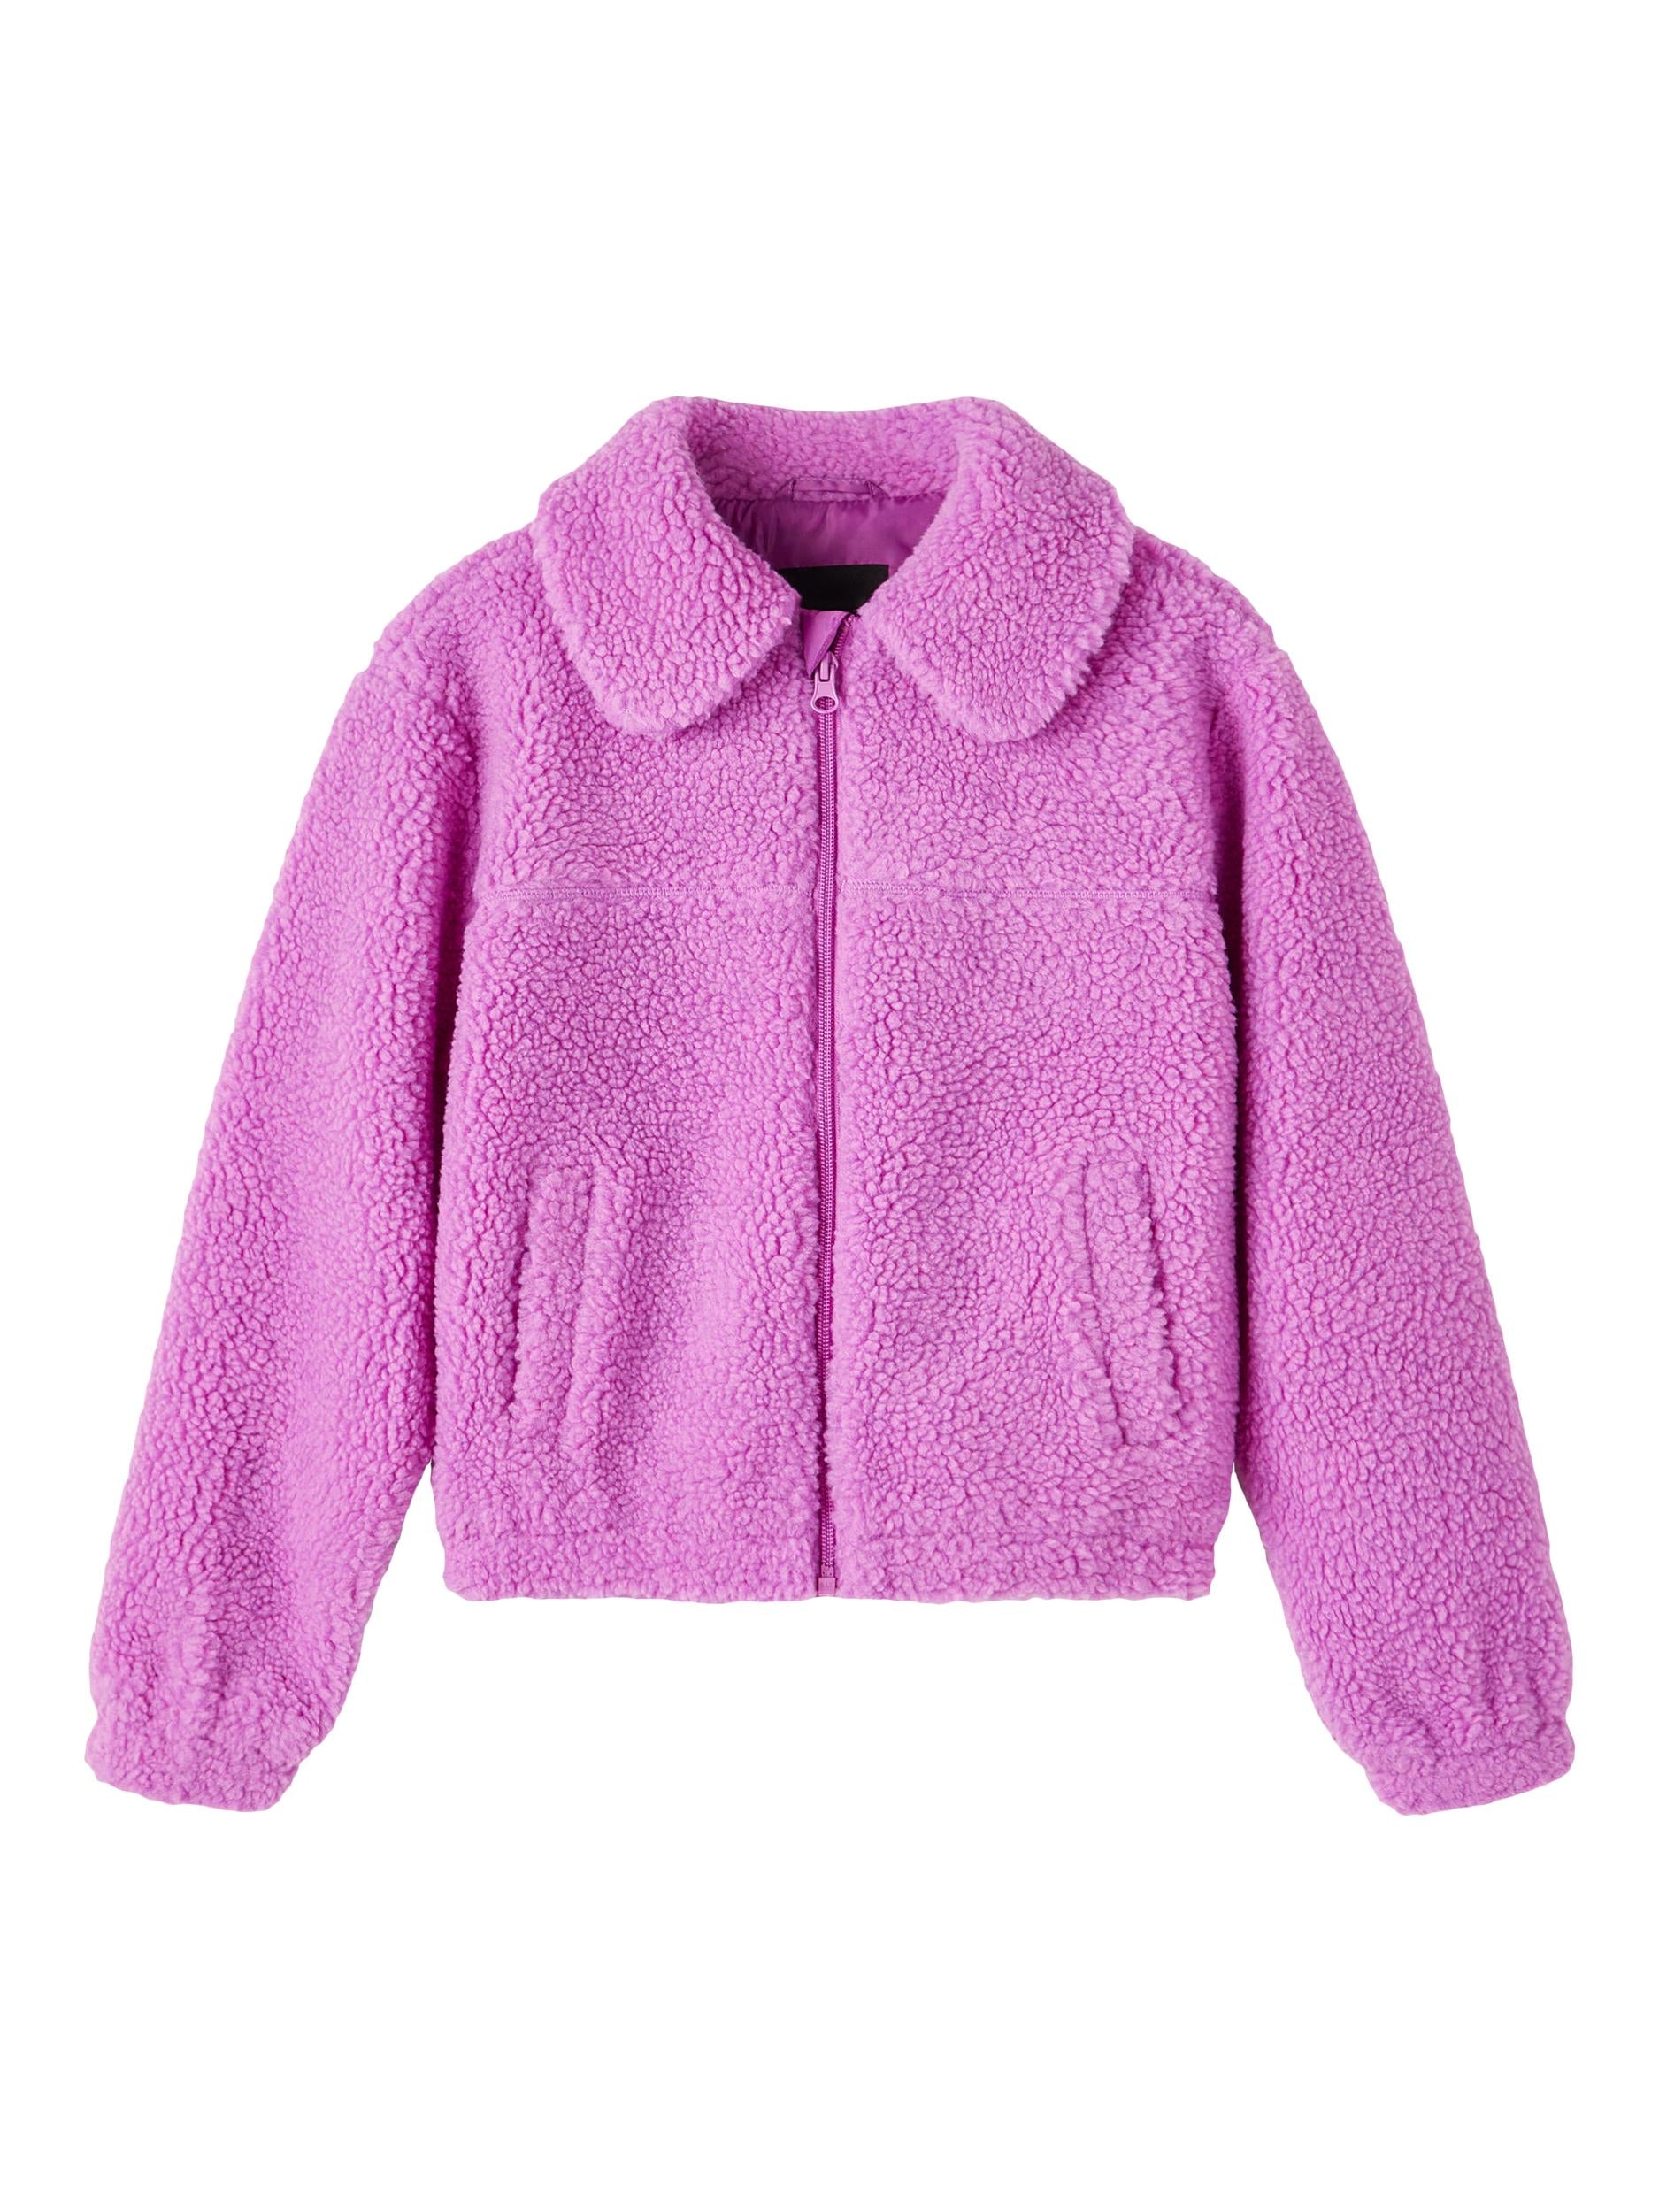 Kid Girl Makoa Teddy Jacket-Radiant Orchid-Front View